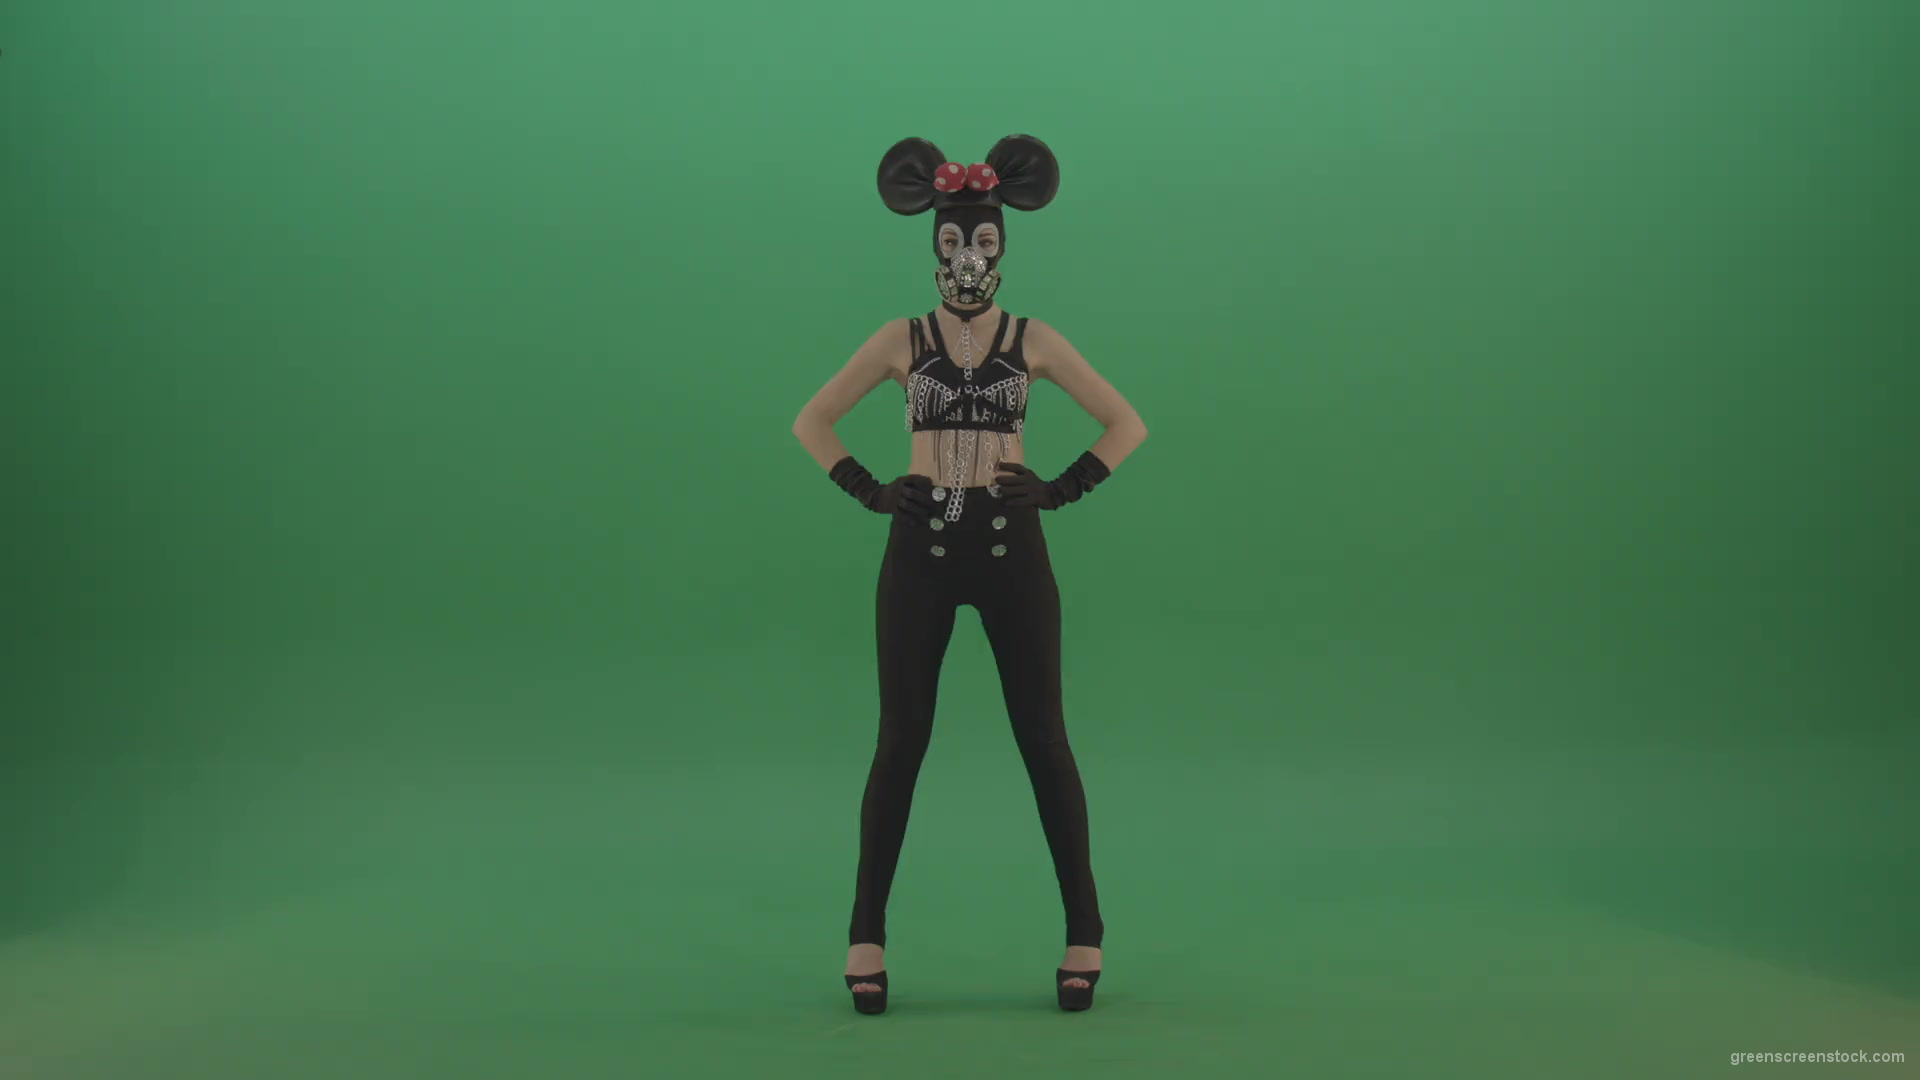 Full-size-strip-girl-in-mouse-costume-and-mask-shaking-ass-and-dancing-on-green-screen-1920_001 Green Screen Stock